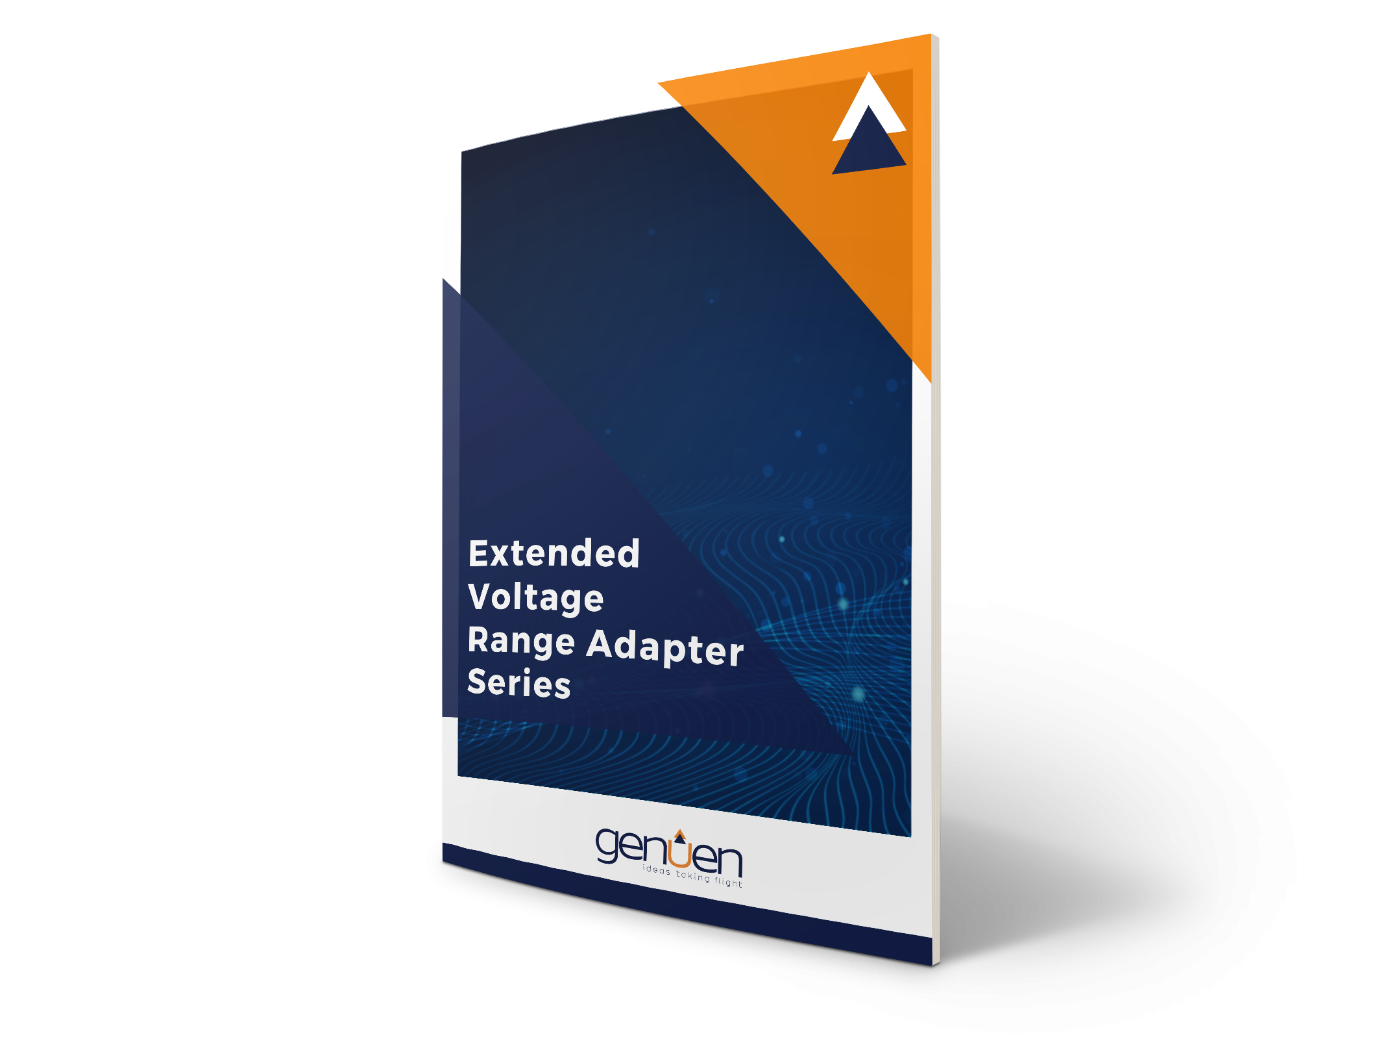 3D Extended Voltage range Adapter Series